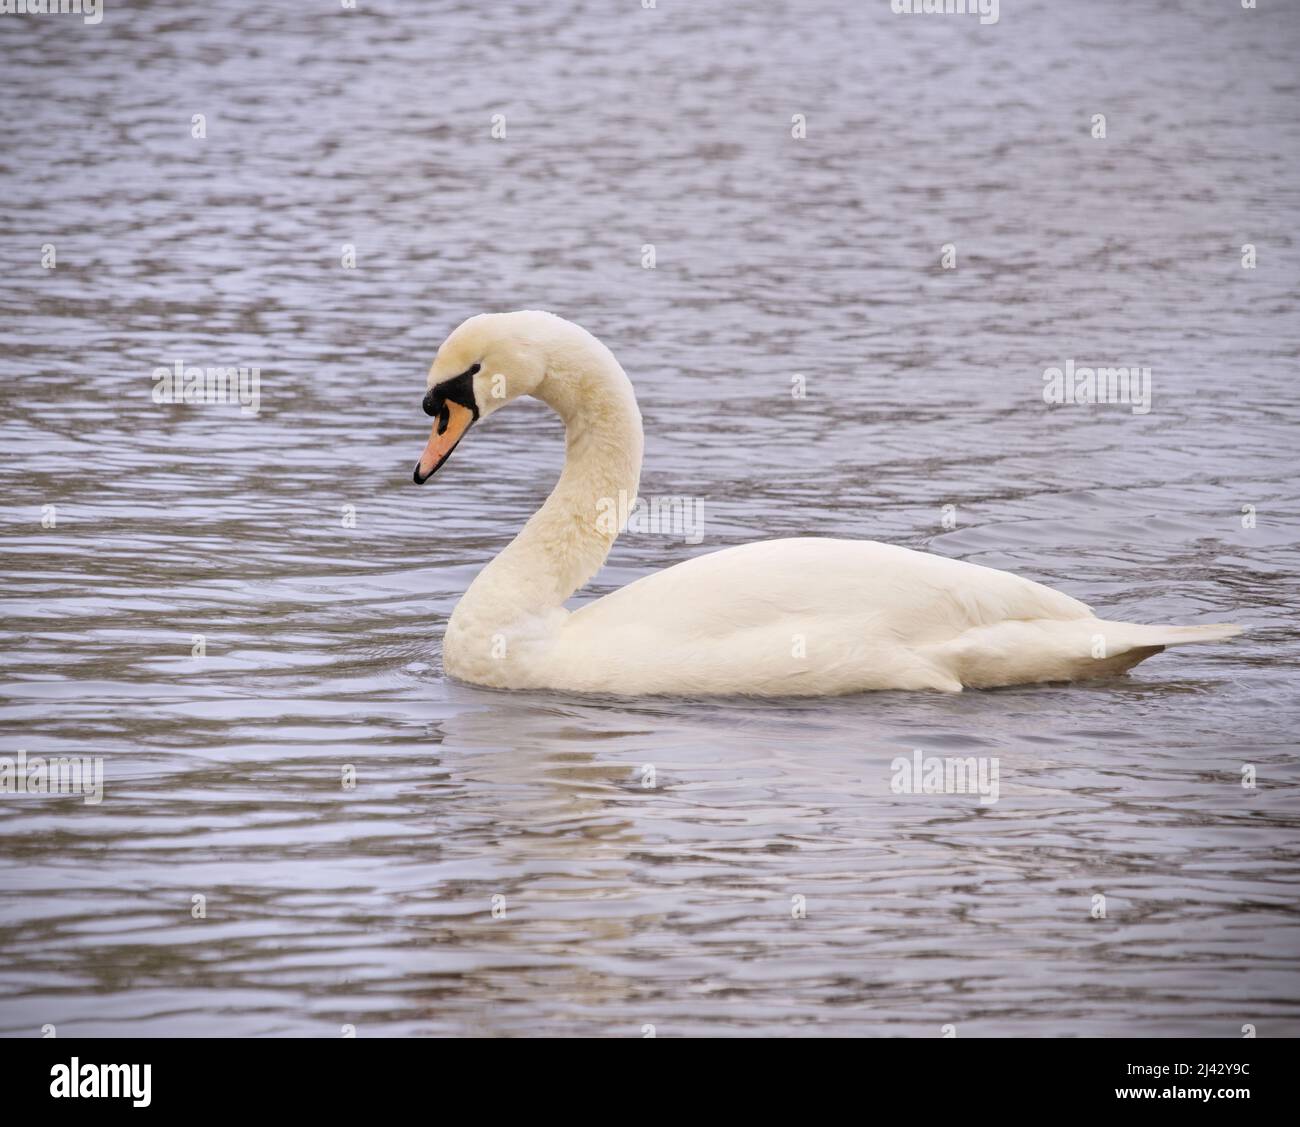 A swan gliding serenely on a park lake Stock Photo